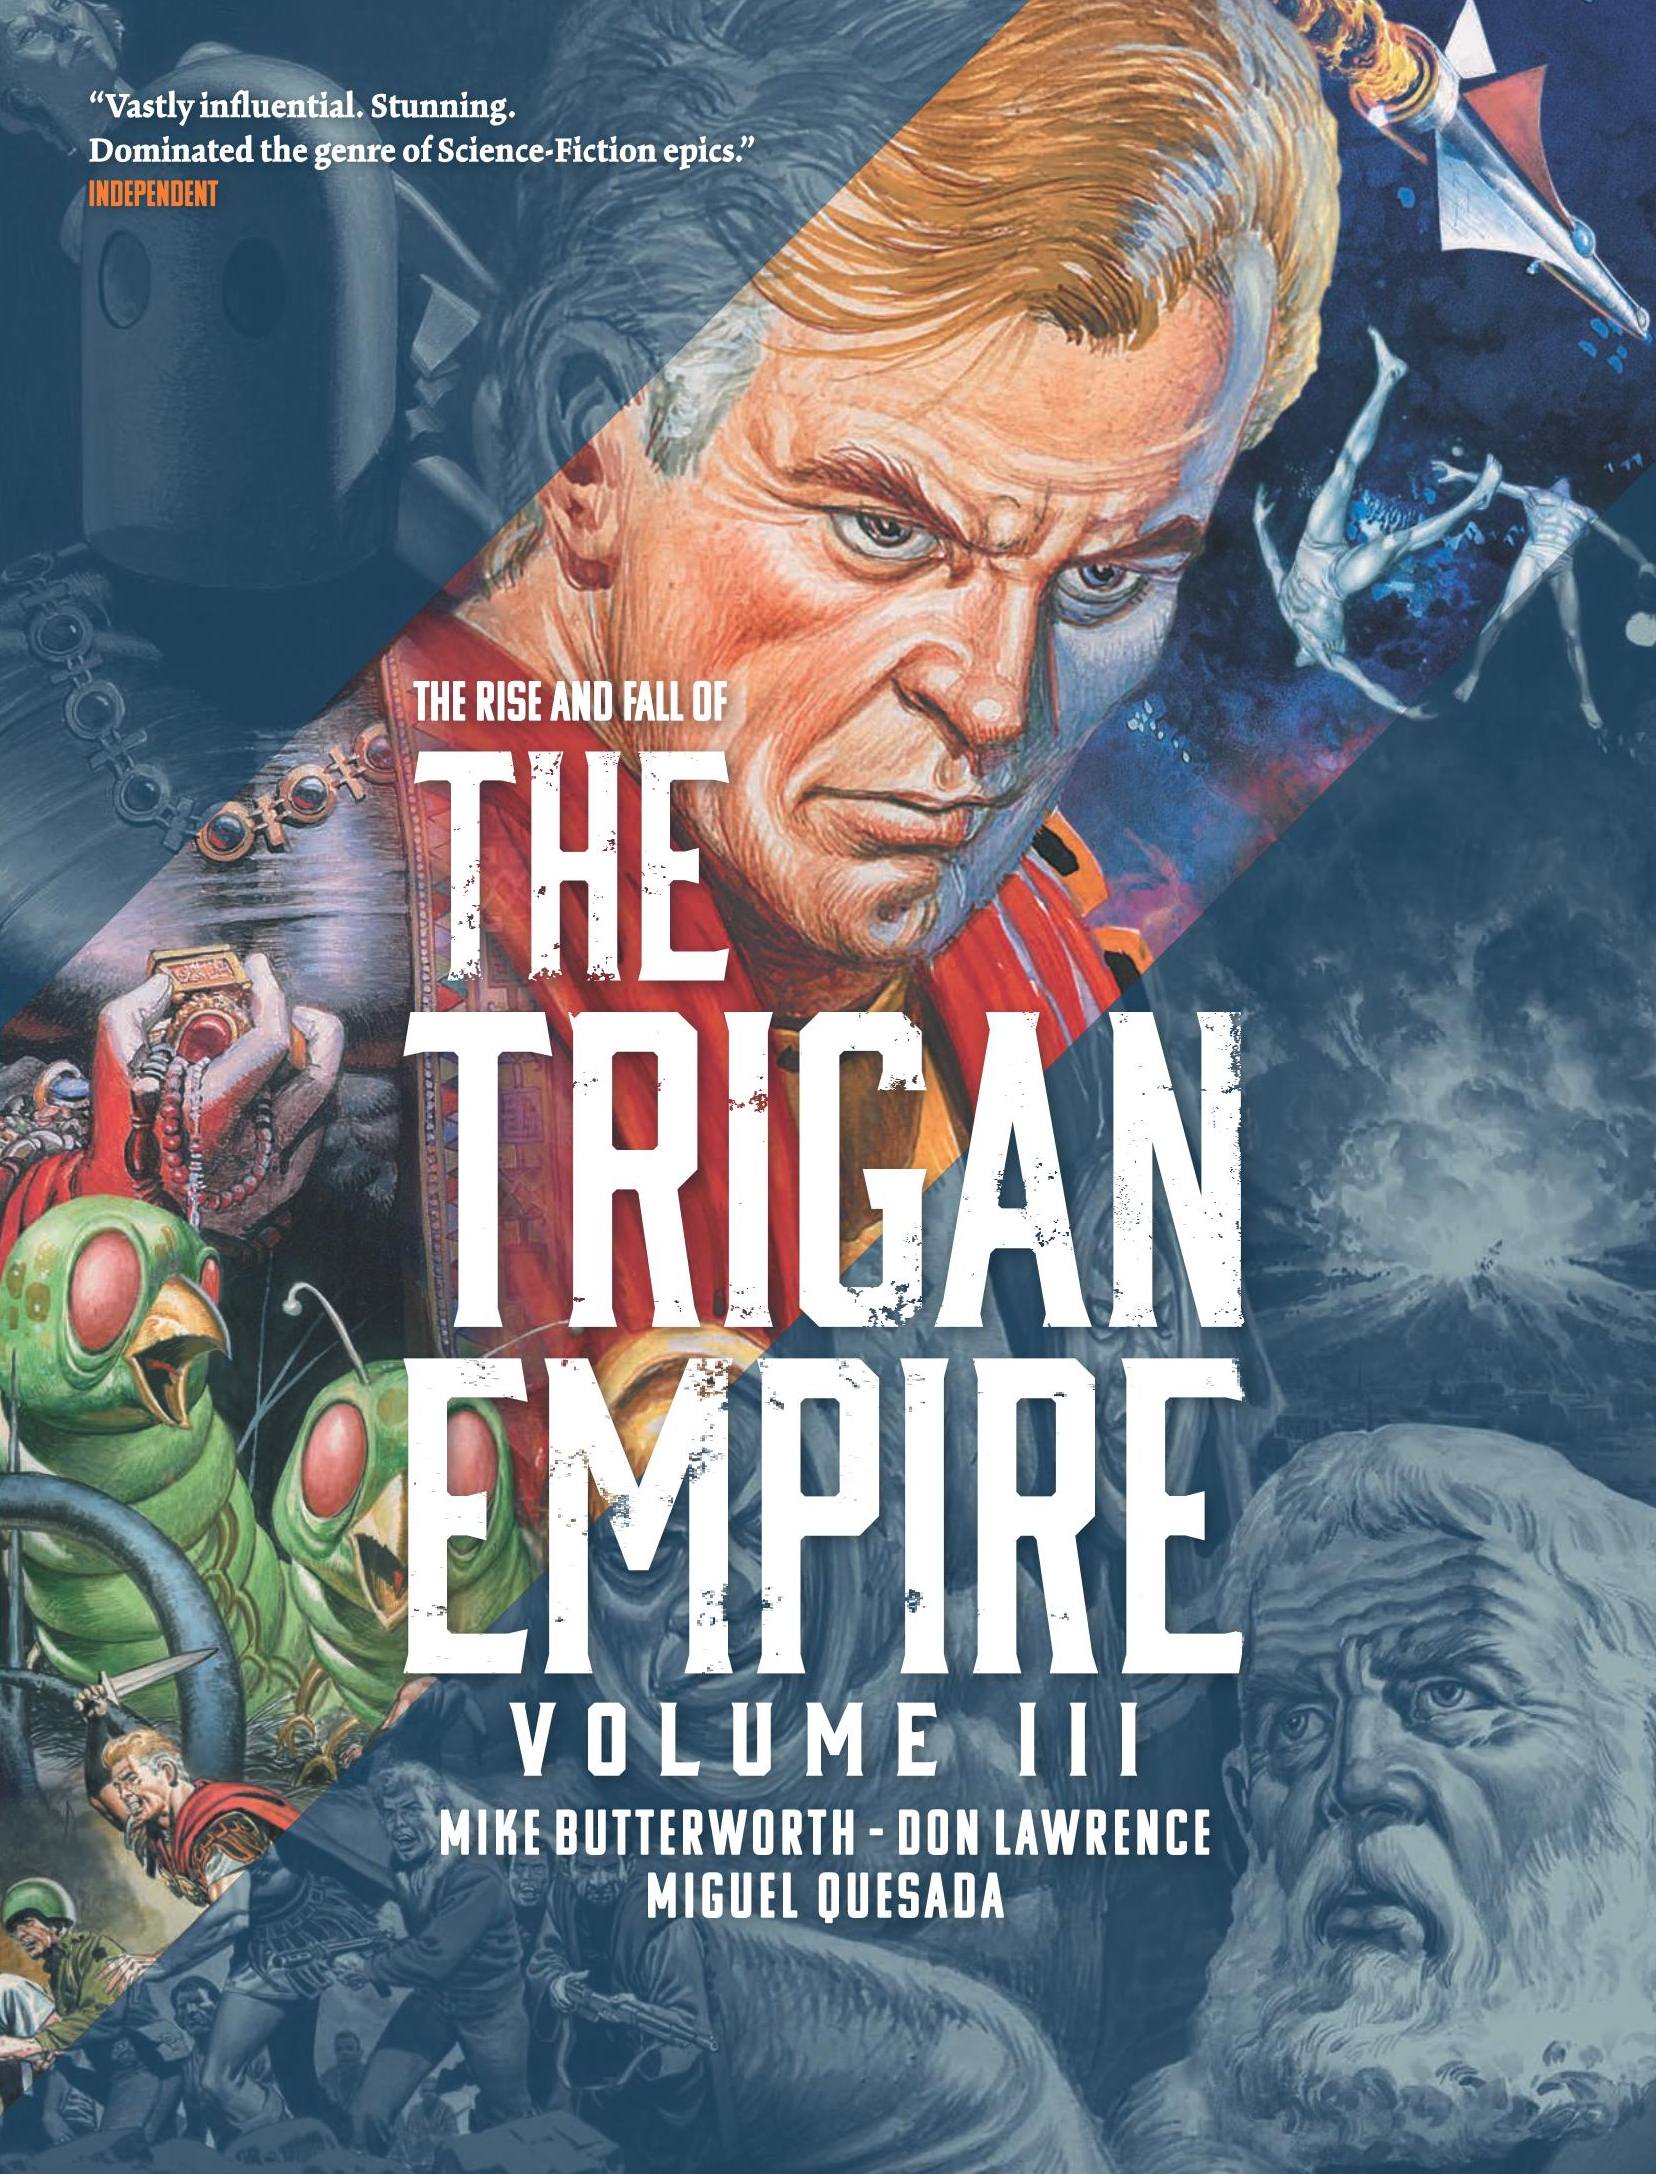 The Rise and Fall of the Trigan Empire Volume 3